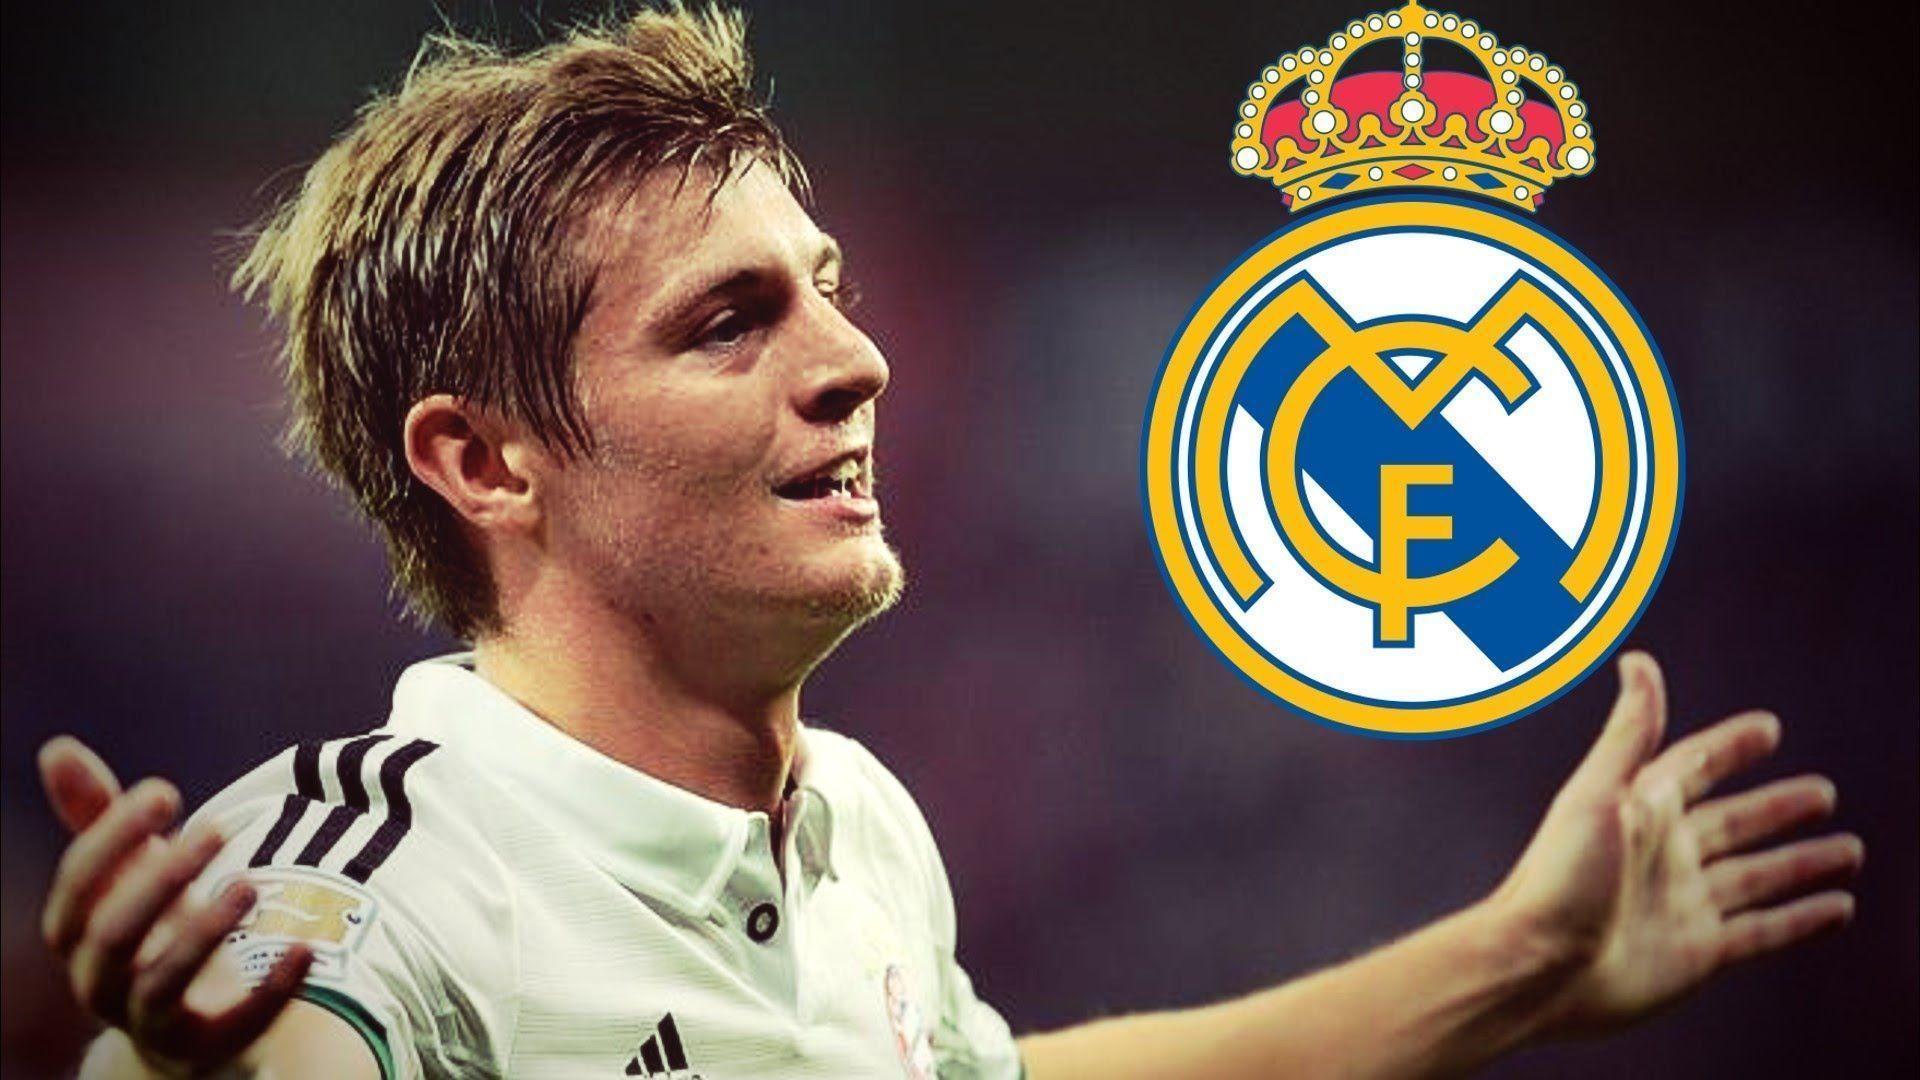 New Toni Kroos Real Madrid Squad Wallpapers HD for Desktop